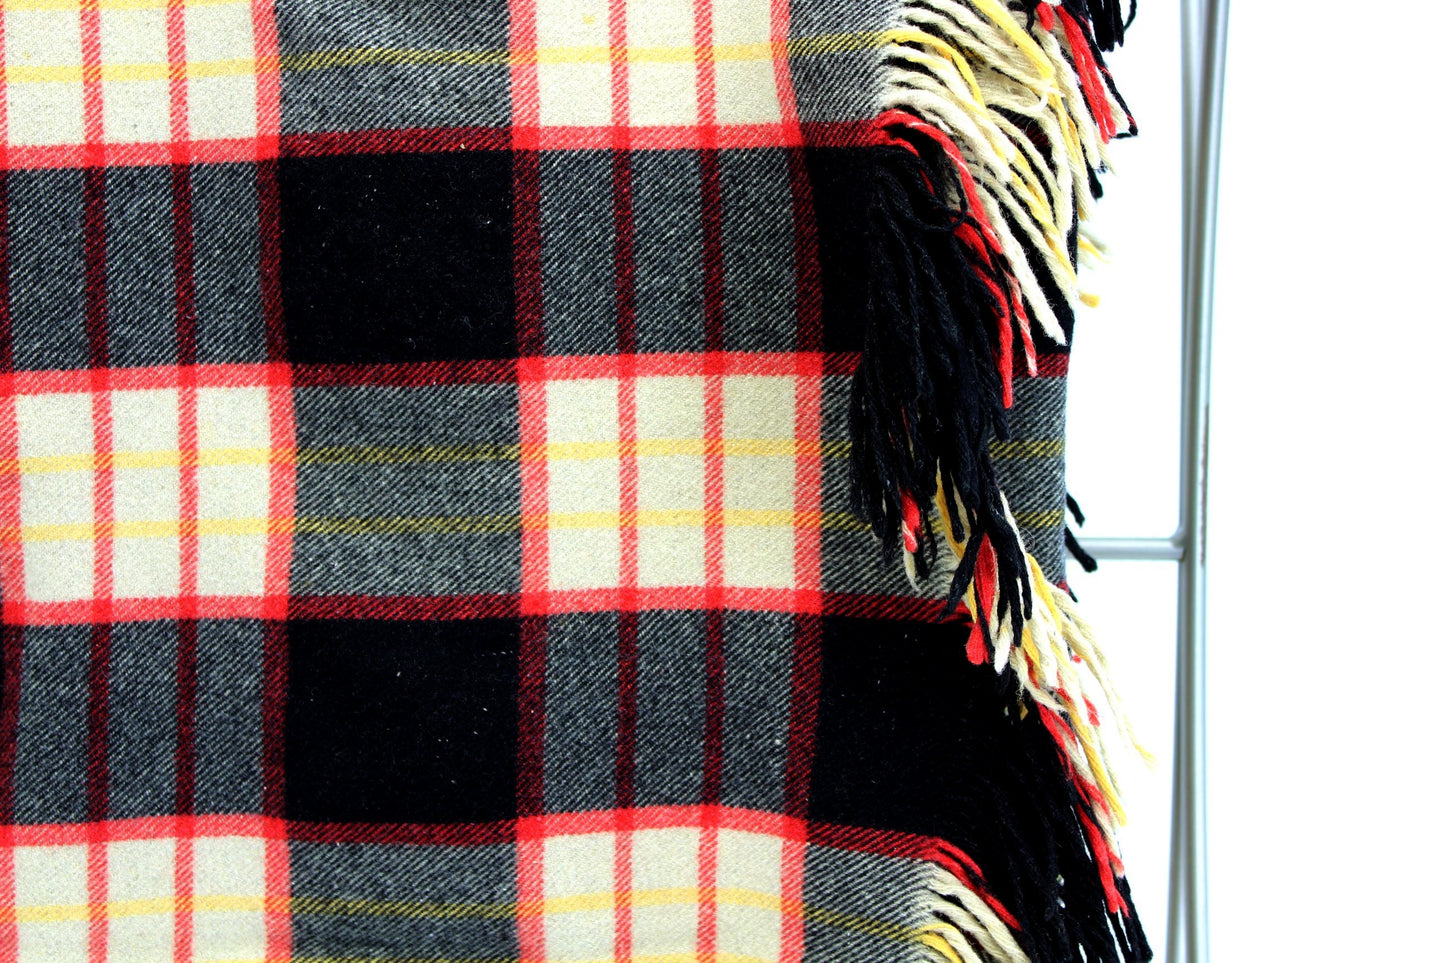 "Mister" Fringed Estate Throw Blanket Plaid Cream Red Back Yellow Fine Wool closeup view of plaid